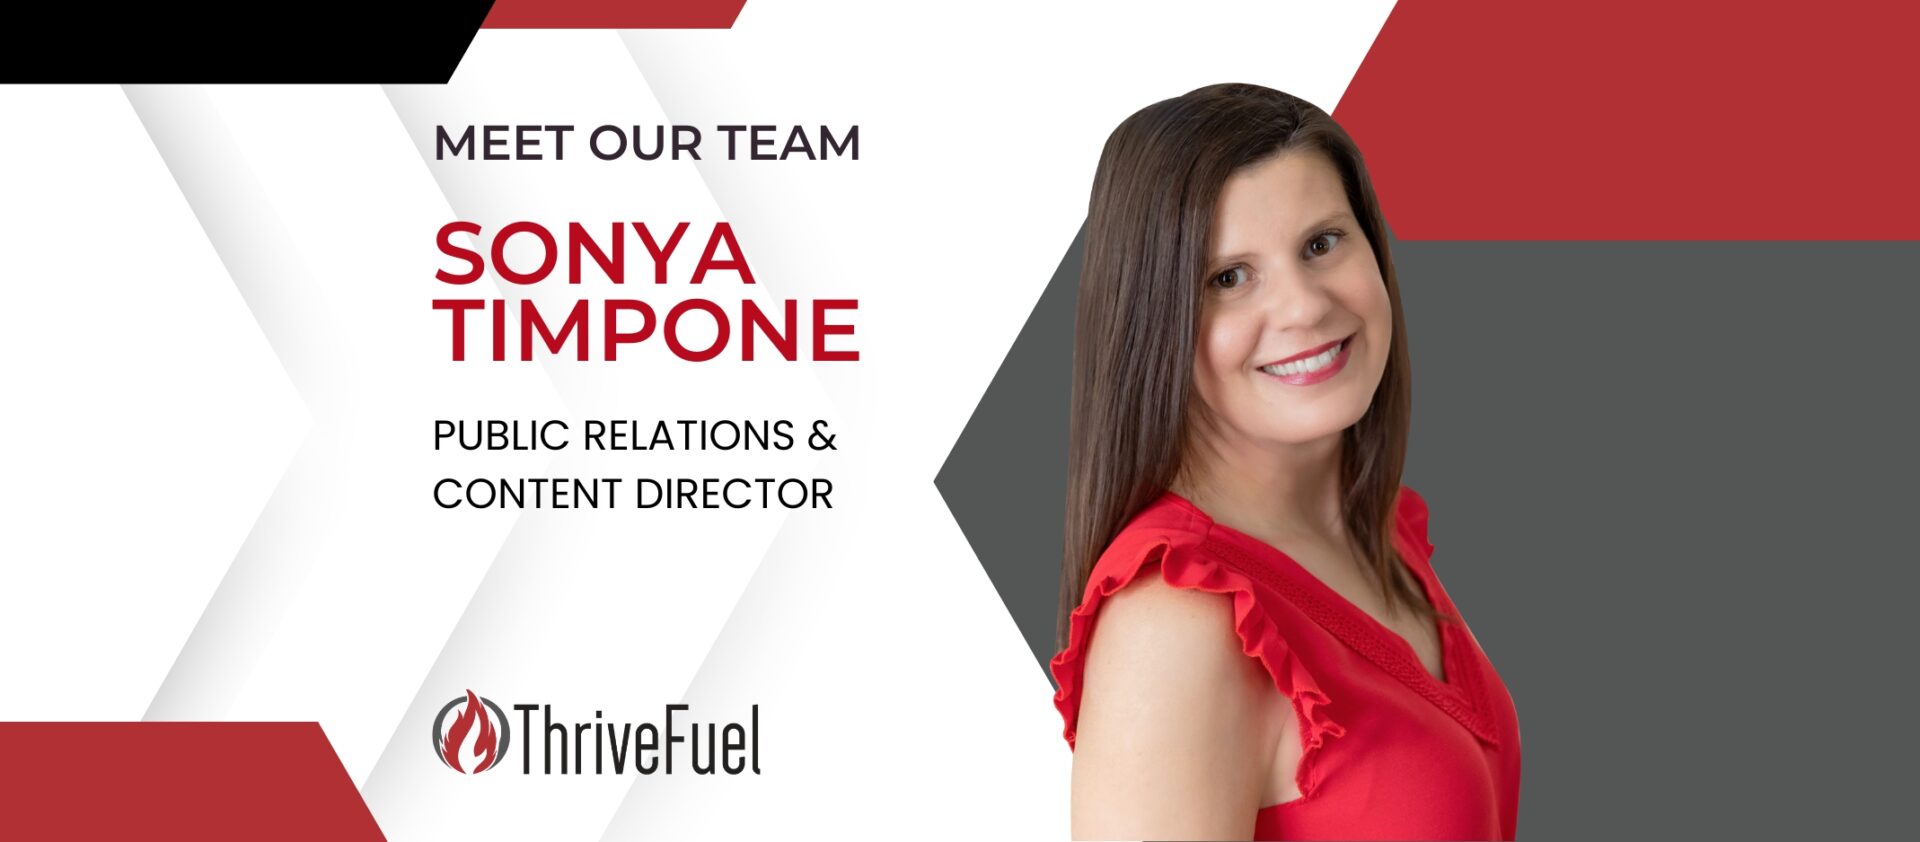 Sonya Timpone joins the ThriveFuel!